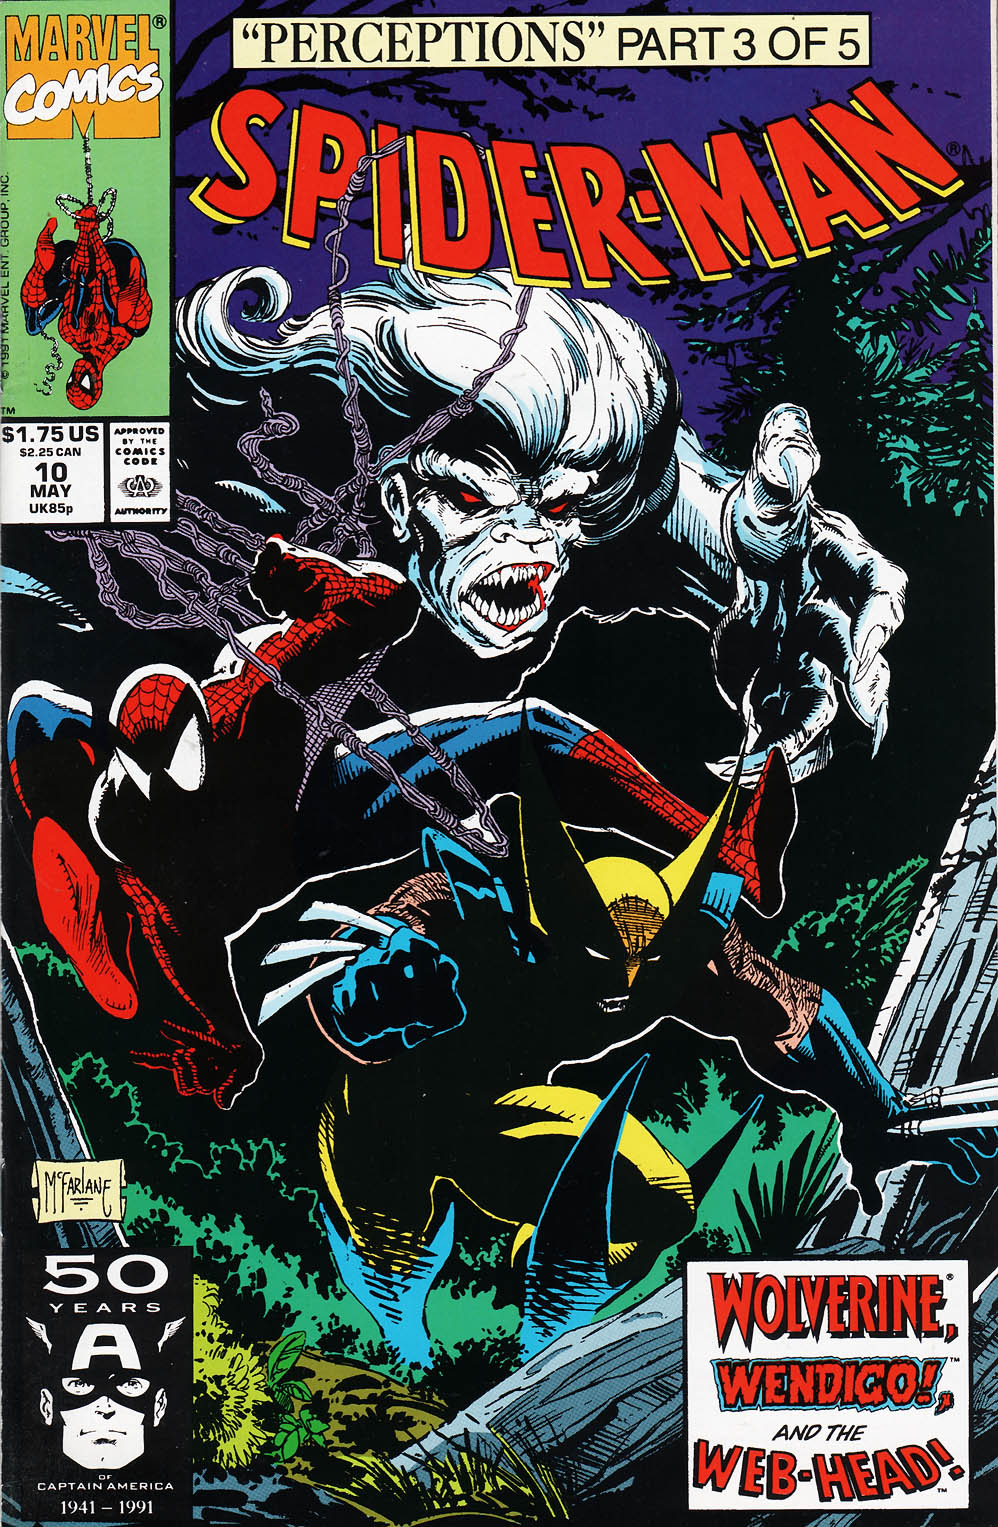 Read online Spider-Man (1990) comic -  Issue #10 - Perceptions Part 3 of 5 - 1